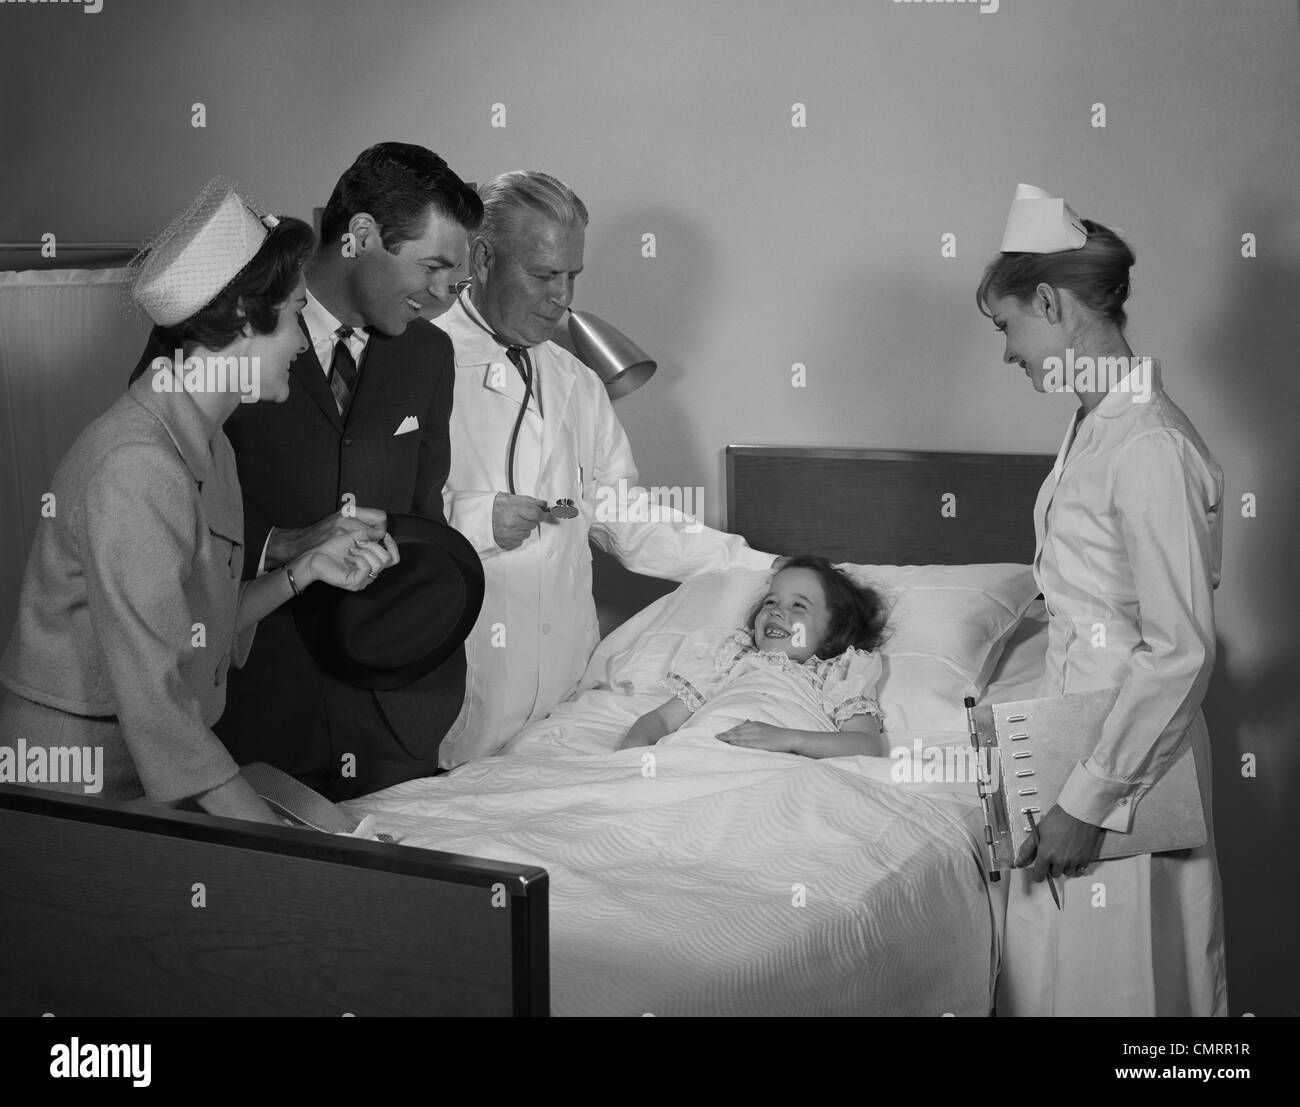 1960s MAN DOCTOR WOMAN NURSE MOTHER FATHER SEEING VISITING SMILING LITTLE GIRL PATIENT IN HOSPITAL BED Stock Photo